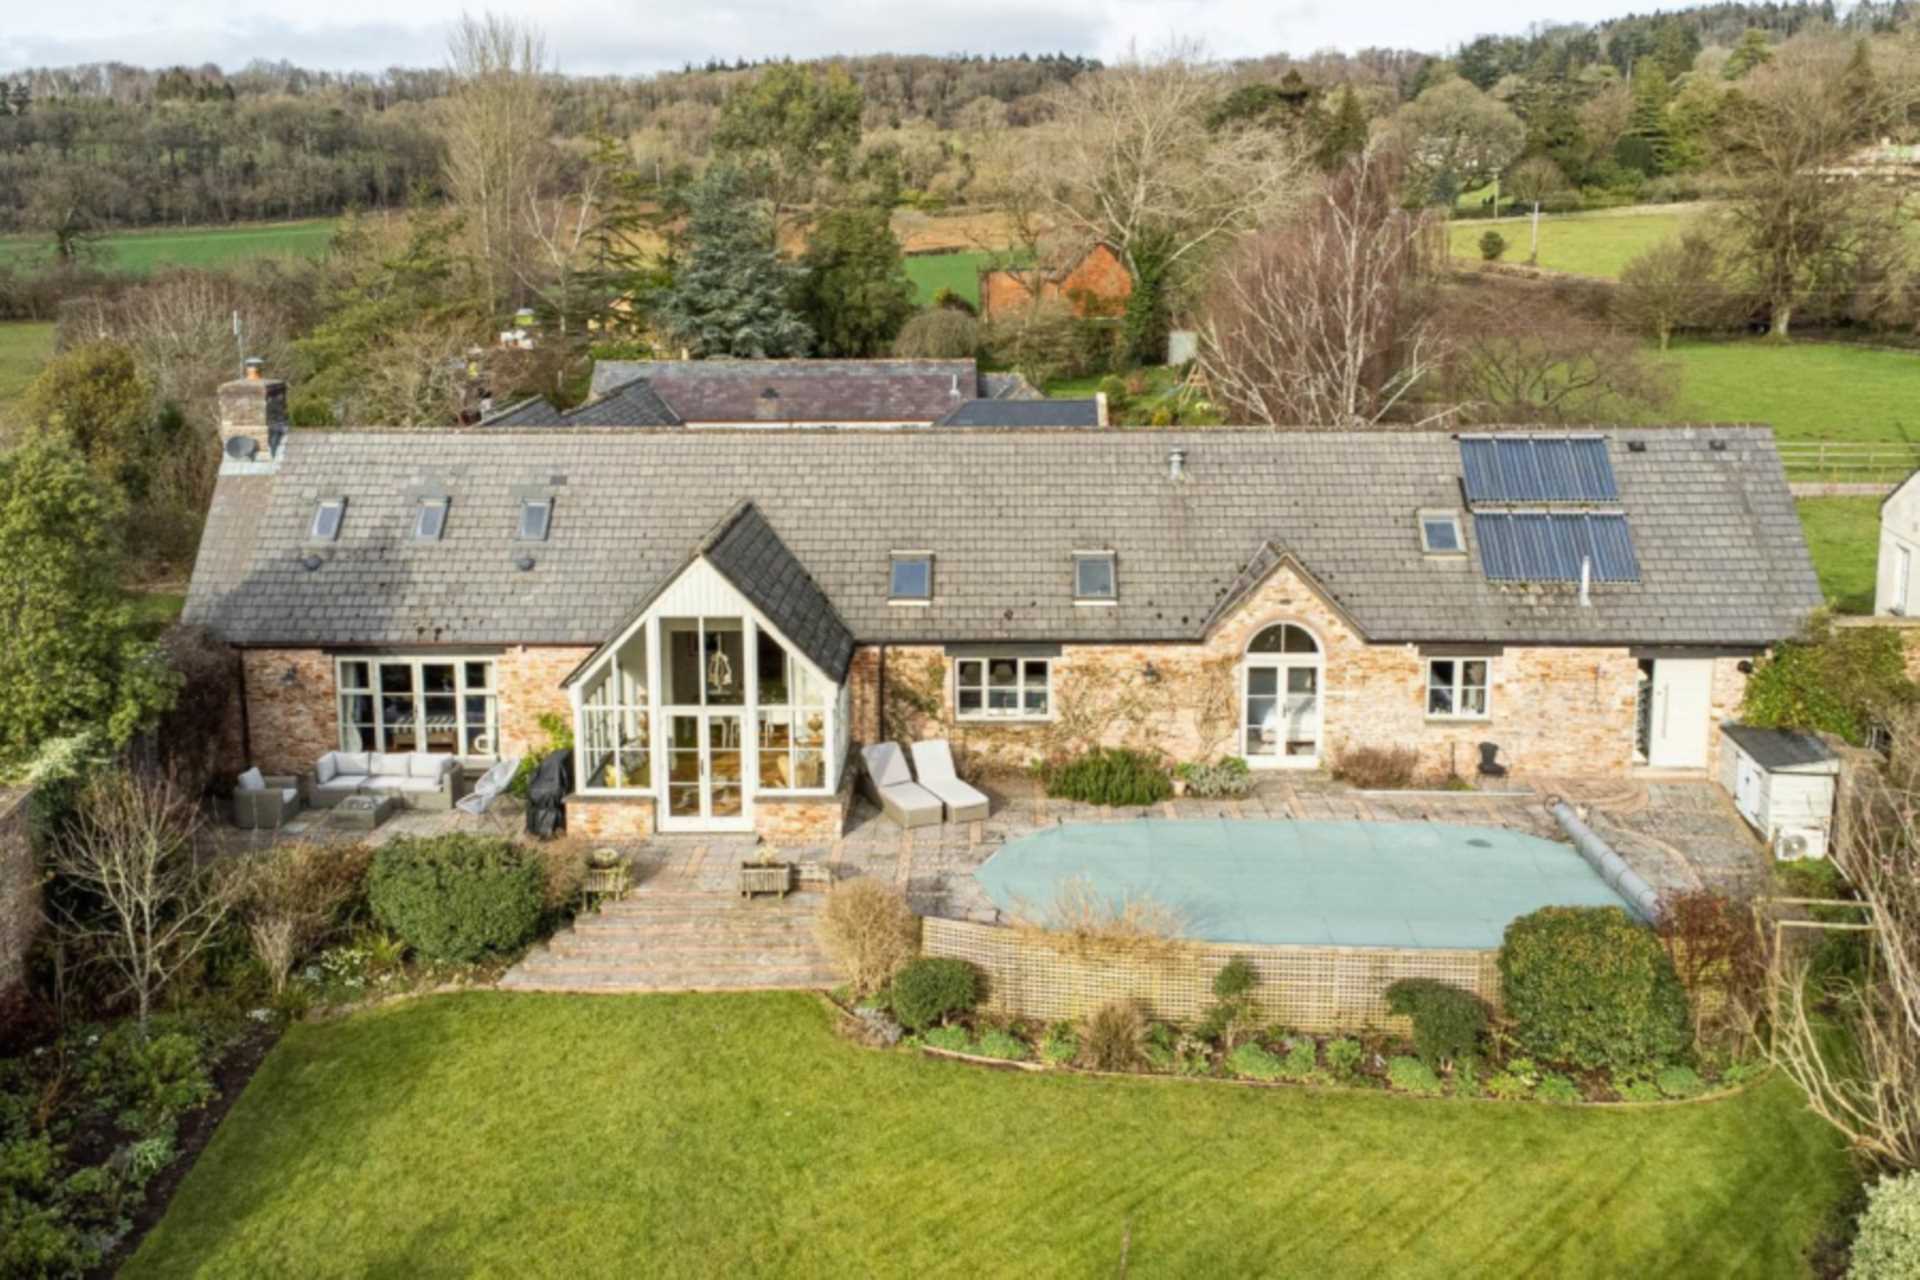 6 bed Detached House for rent in Wells. From Swallows Property Letting - Frome